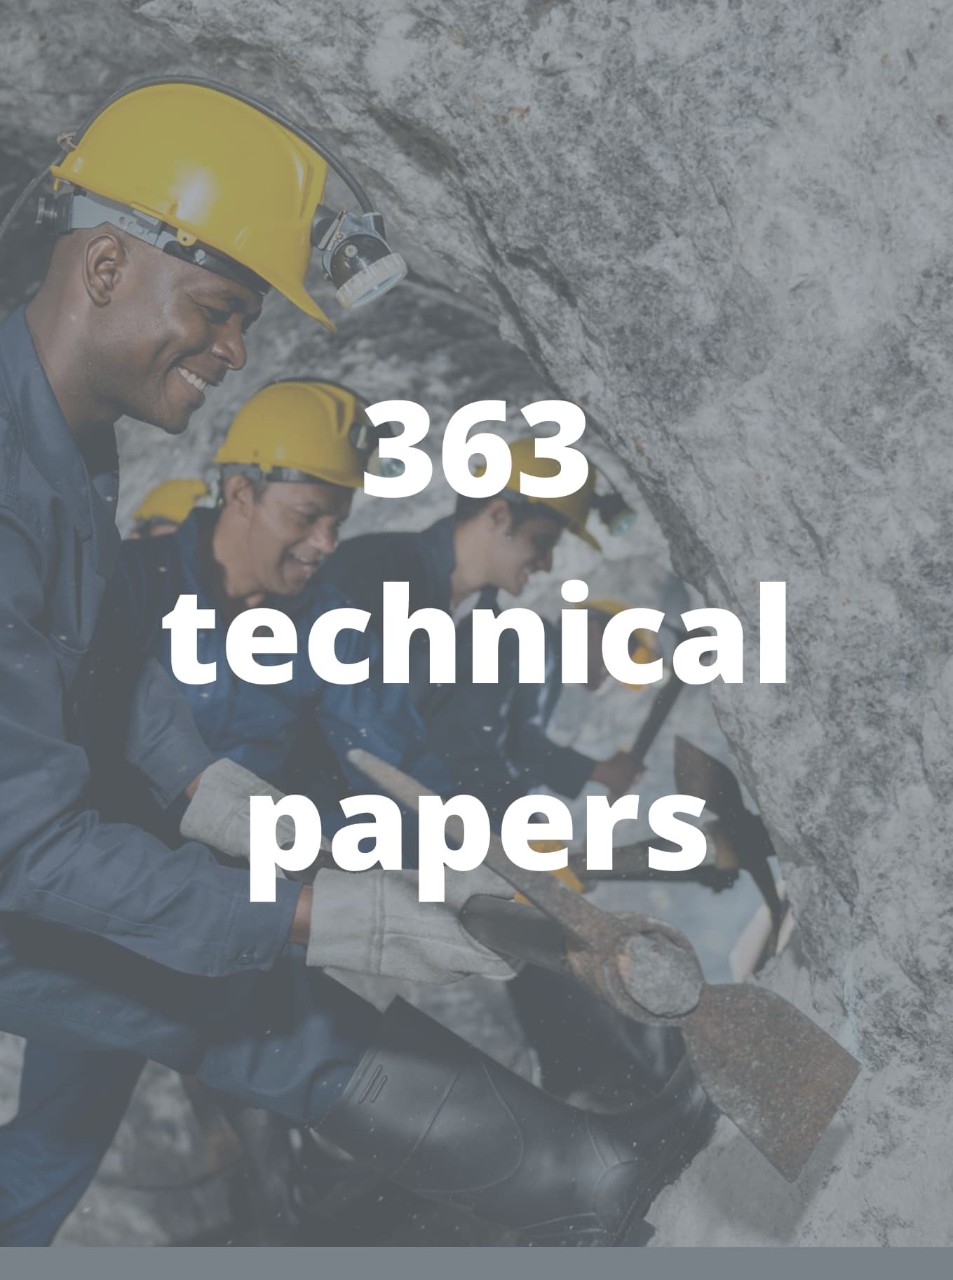 MEOS GEO_363 technical papers